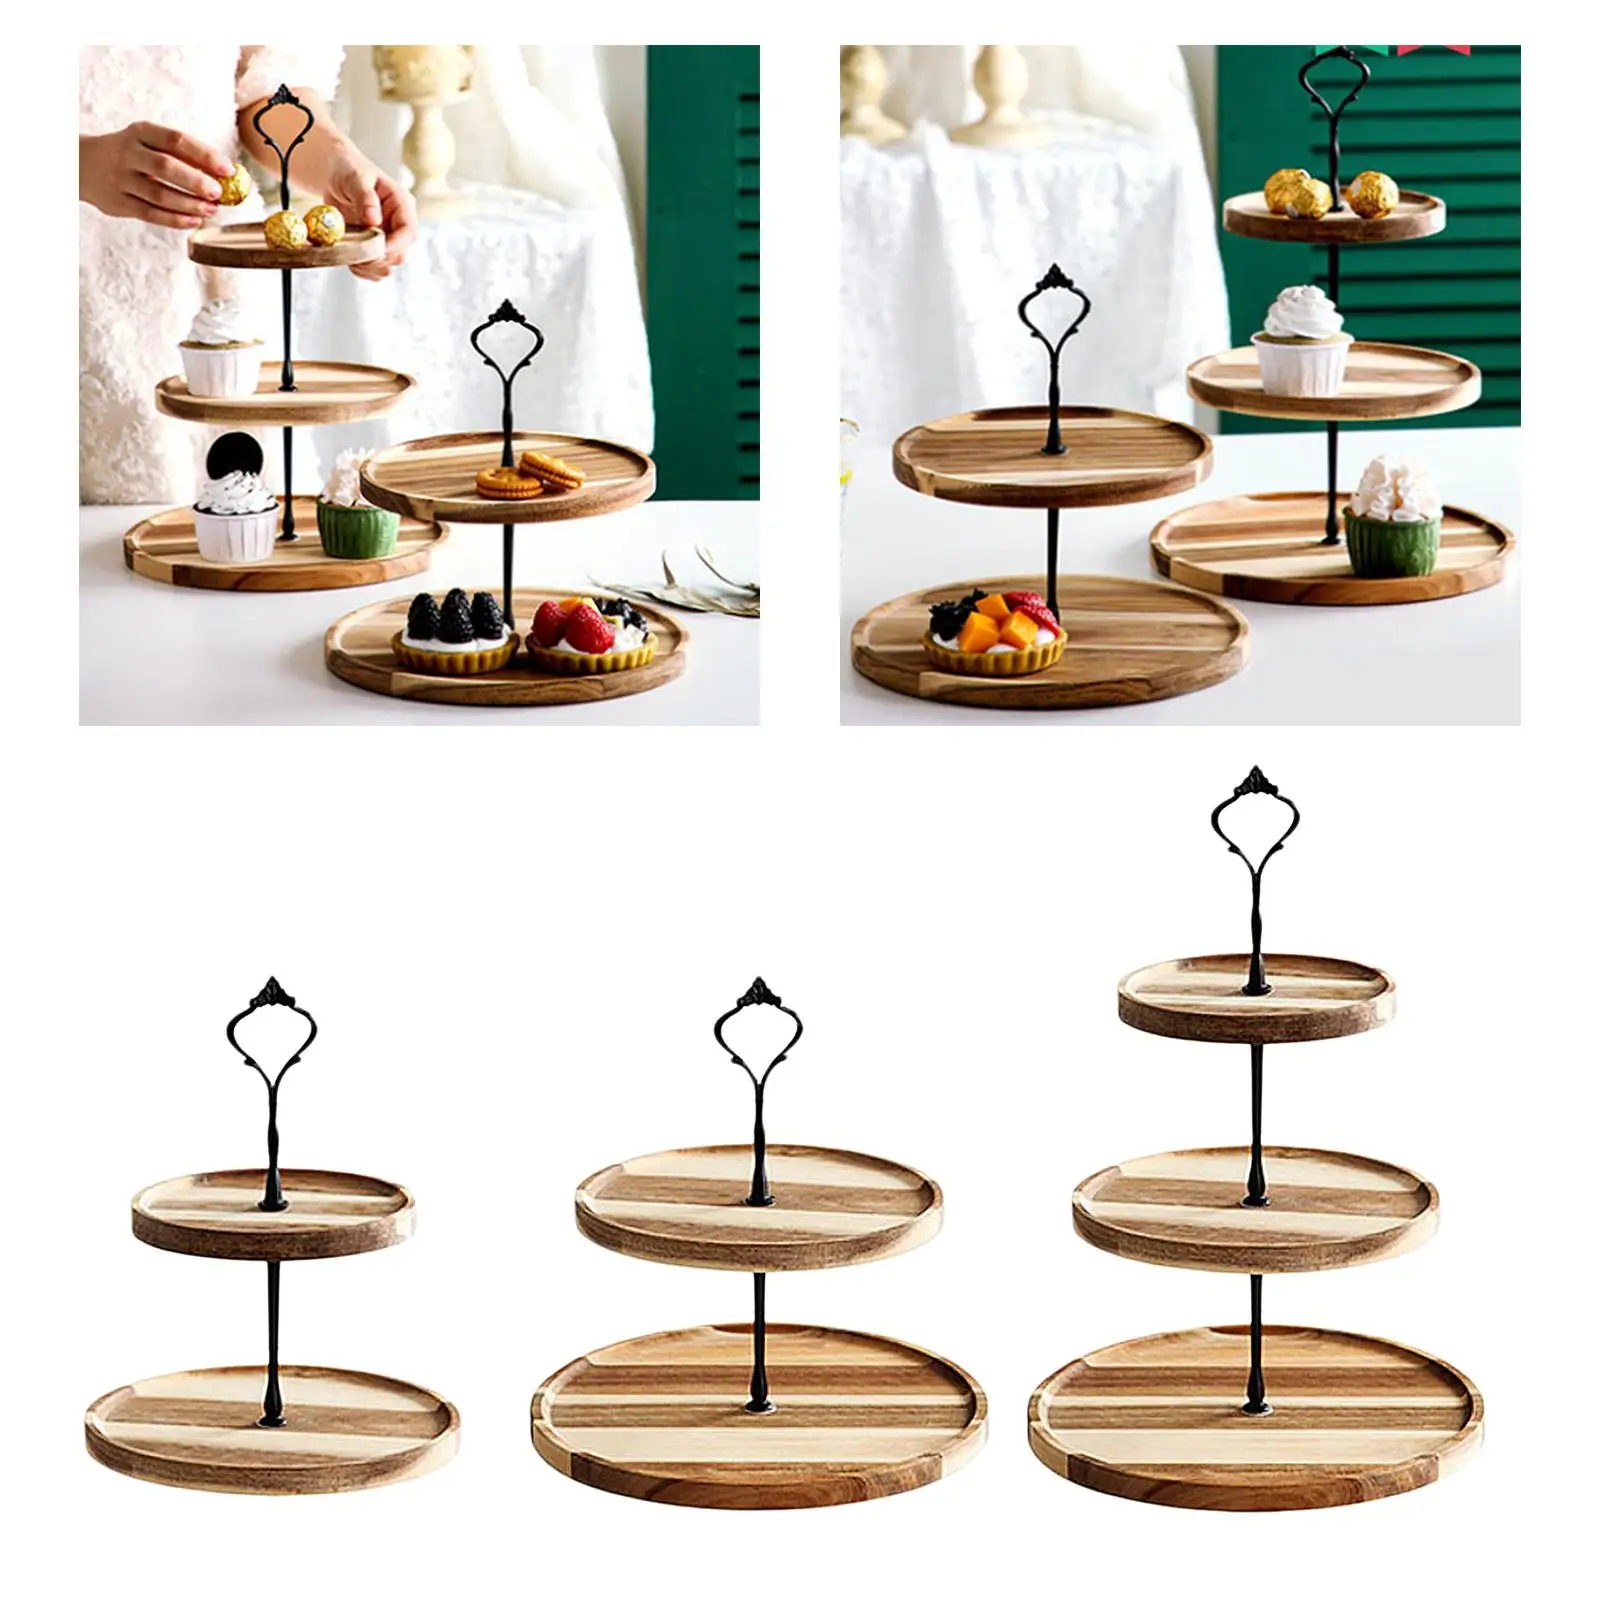 Dessert Cake Stand Fruit Cupcake Stand Kitchen Serving Container Decor Stand